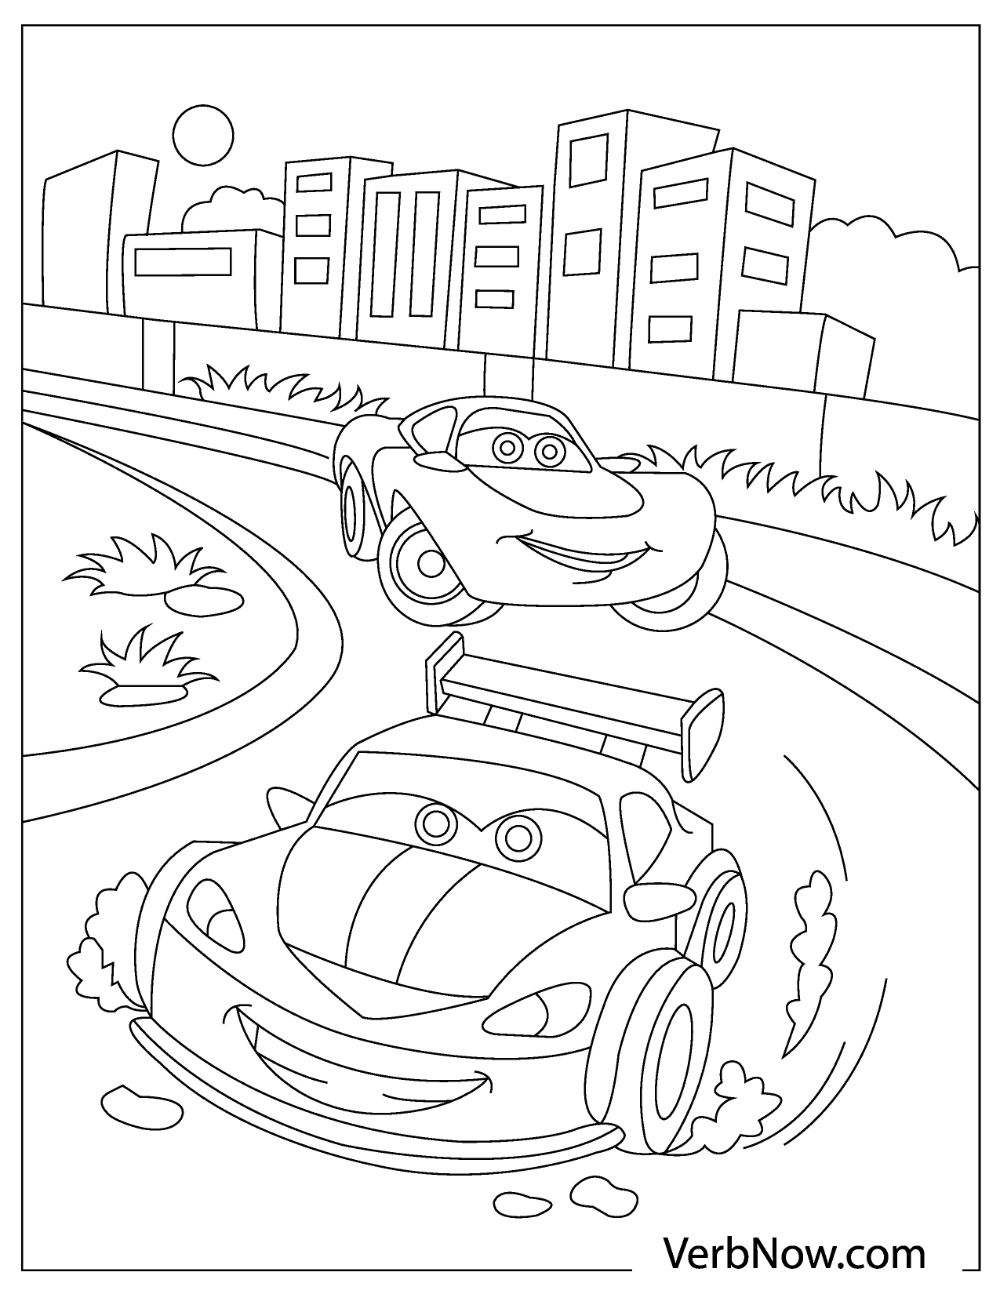 Free CARS Coloring Pages for Download (Printable PDF) - VerbNow